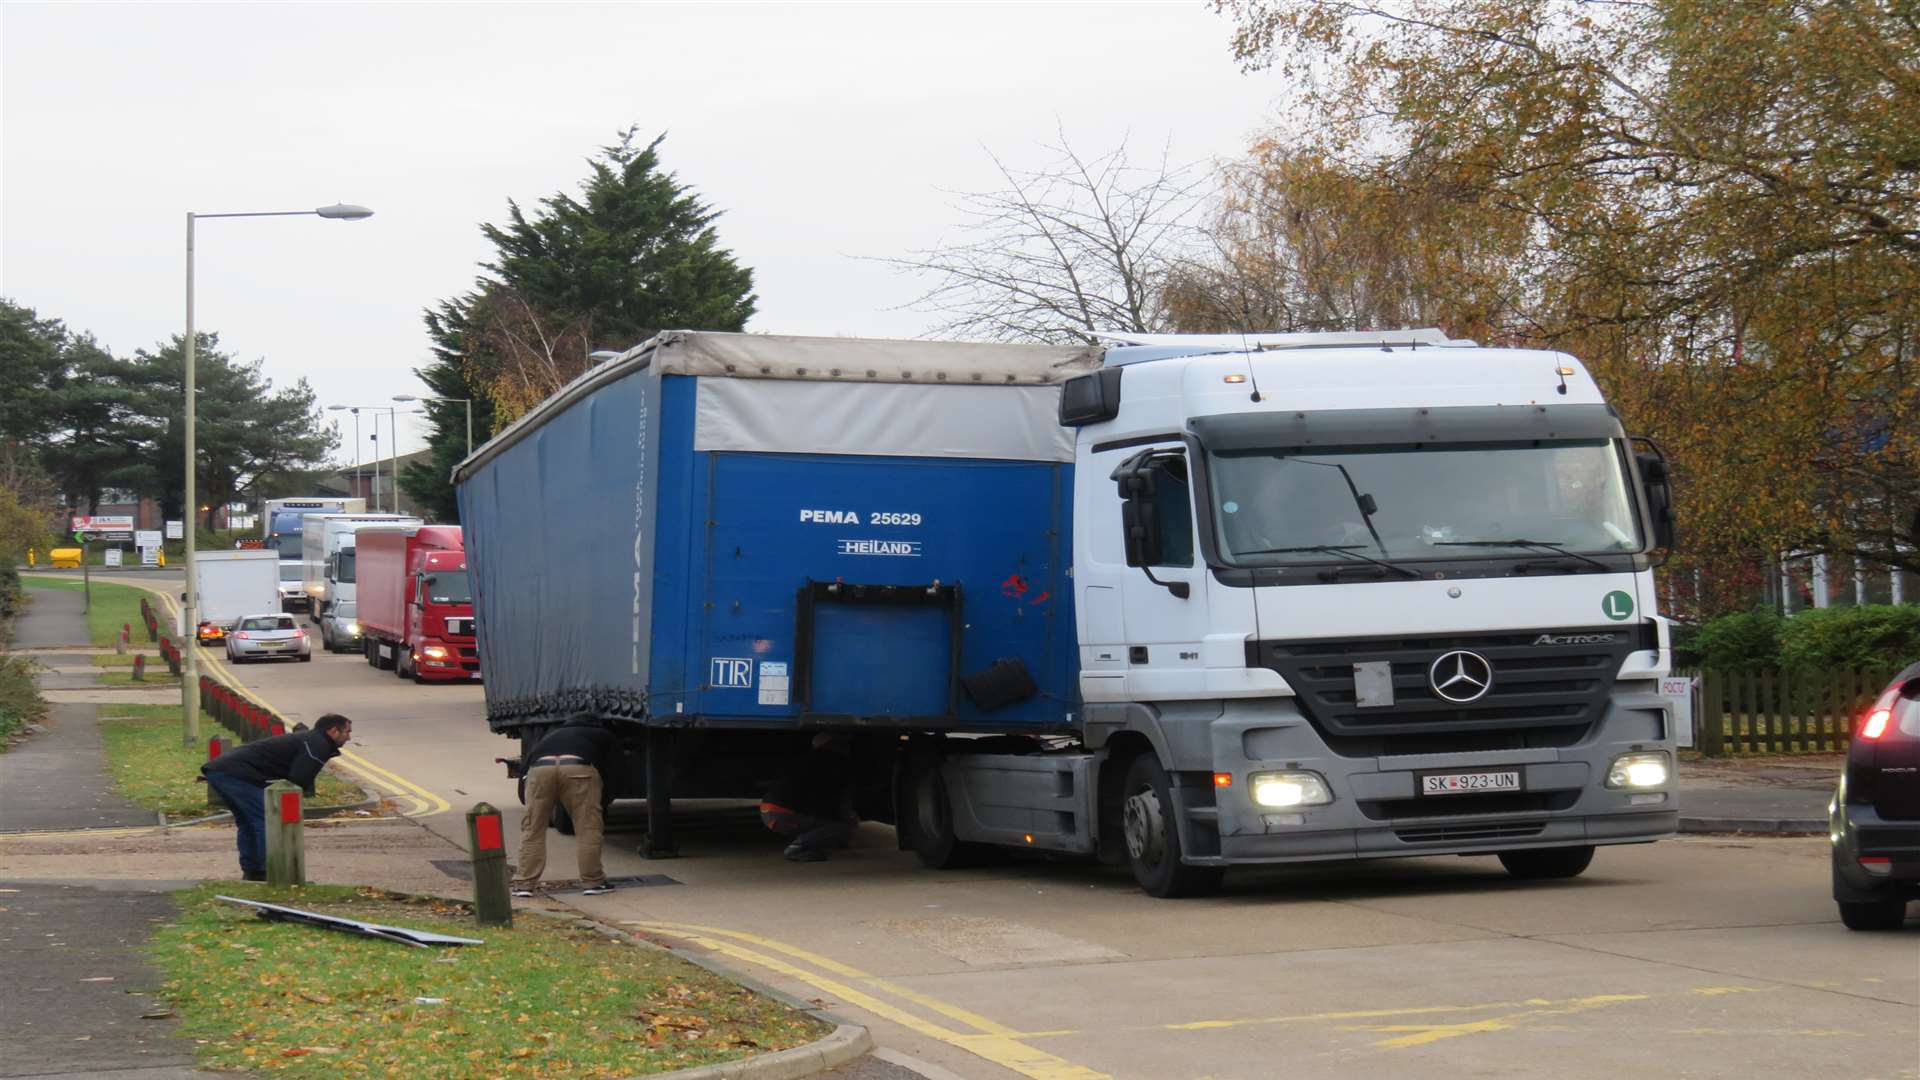 The lorry on the Henwood estate which caused delays